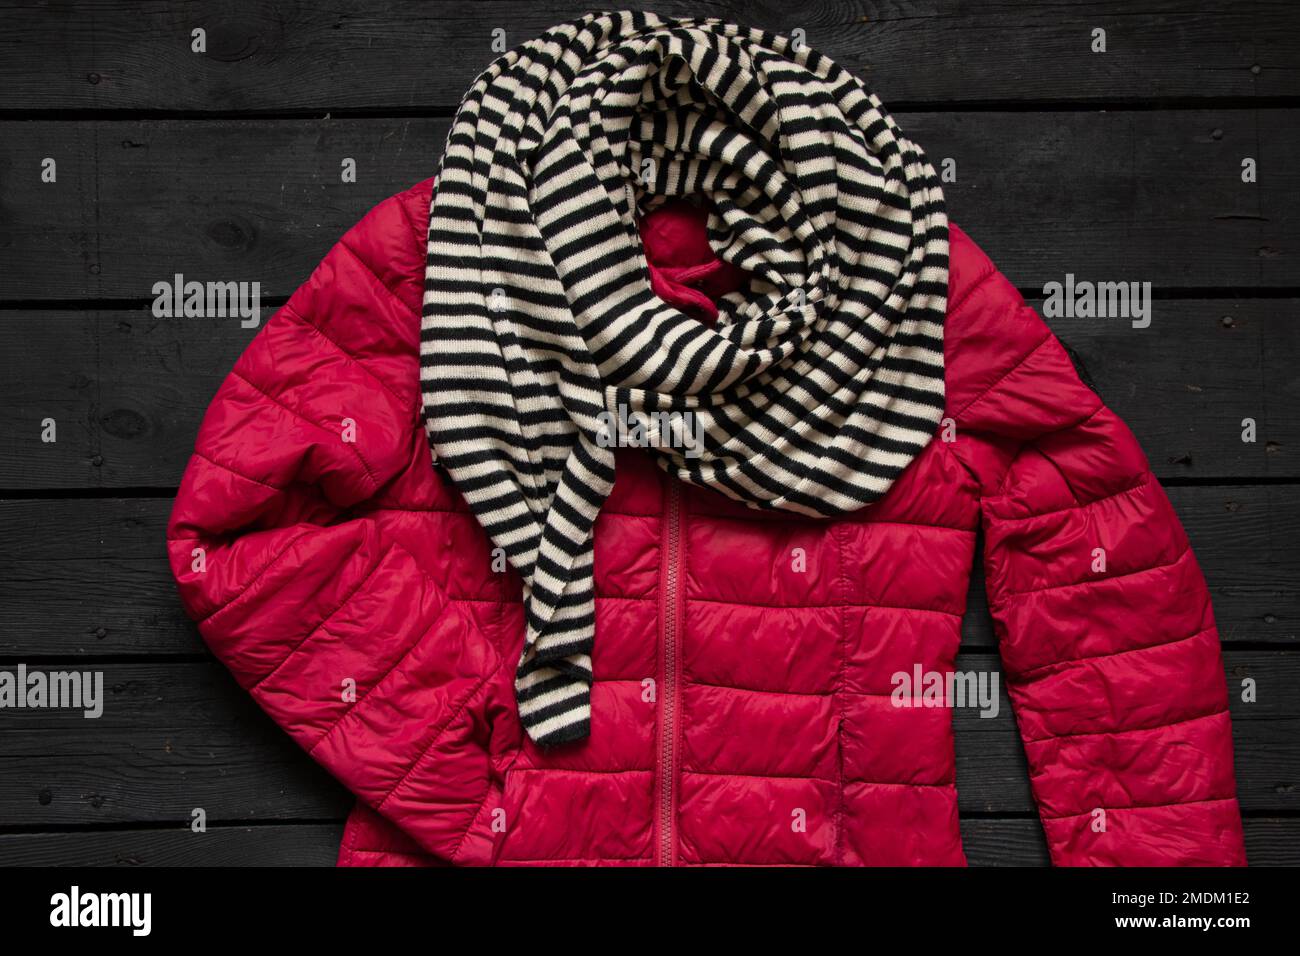 red winter women's warm jacket and striped black and white scarf lie on a black wooden table, winter clothes, jacket Stock Photo